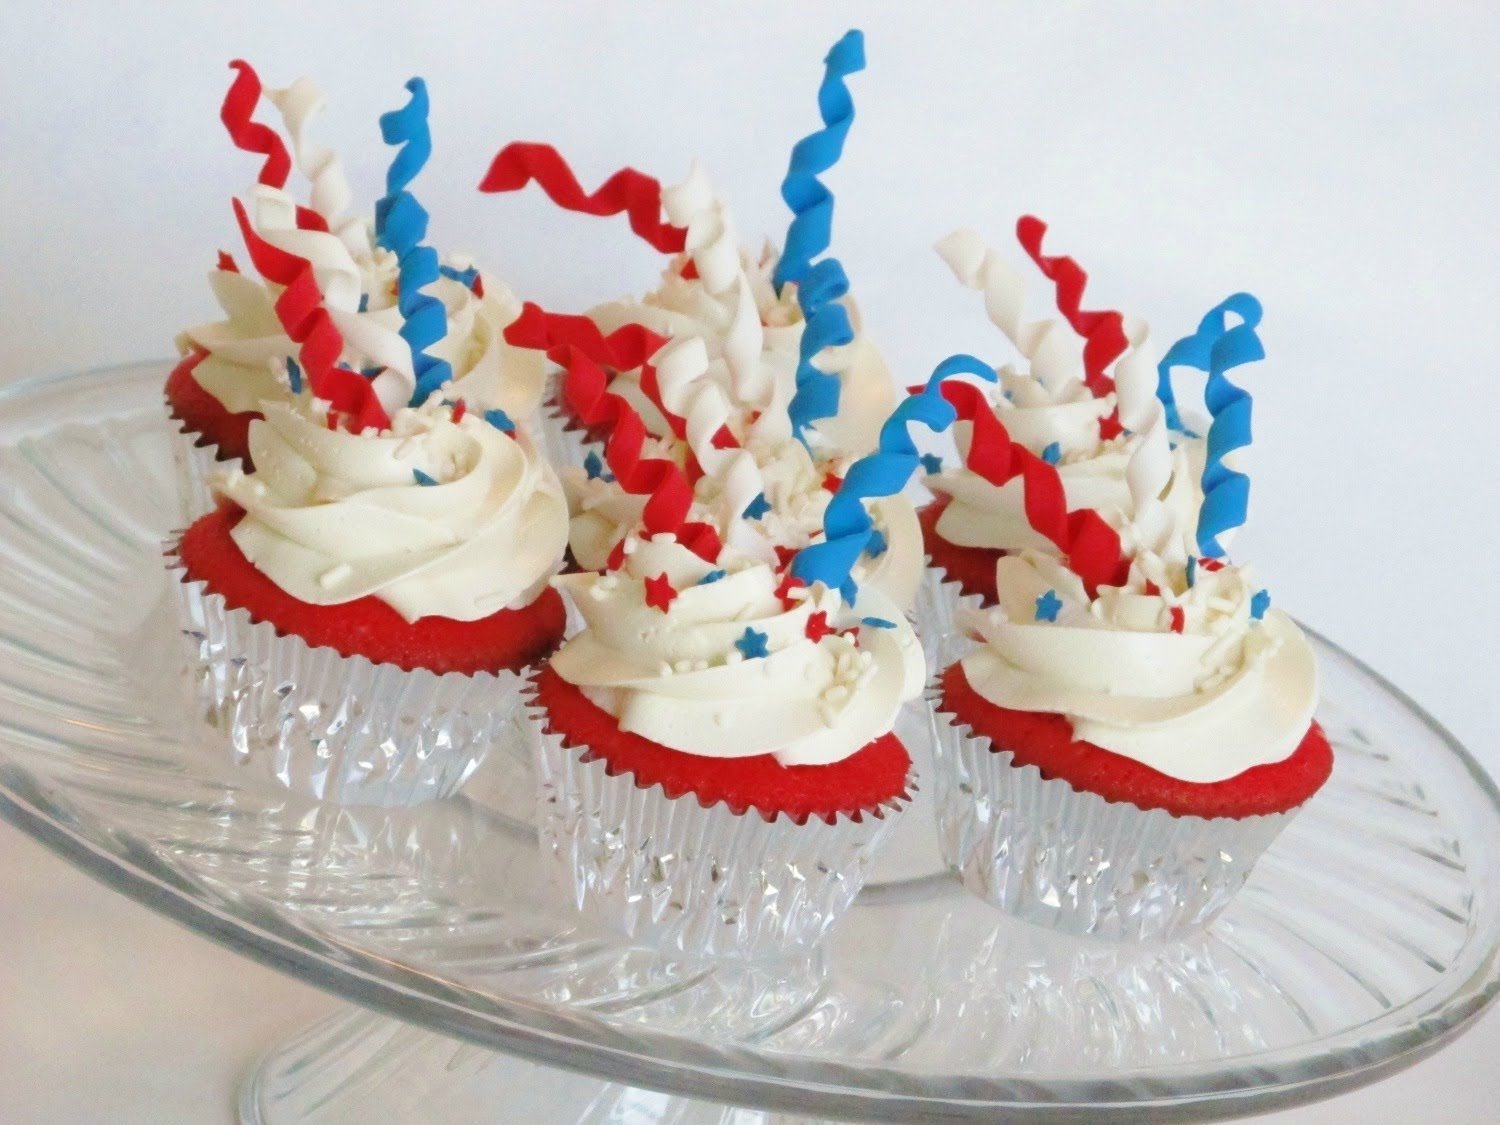 10 Wonderful 4Th Of July Cupcake Ideas how to make 4th of july firework cupcakes youtube 1 2022